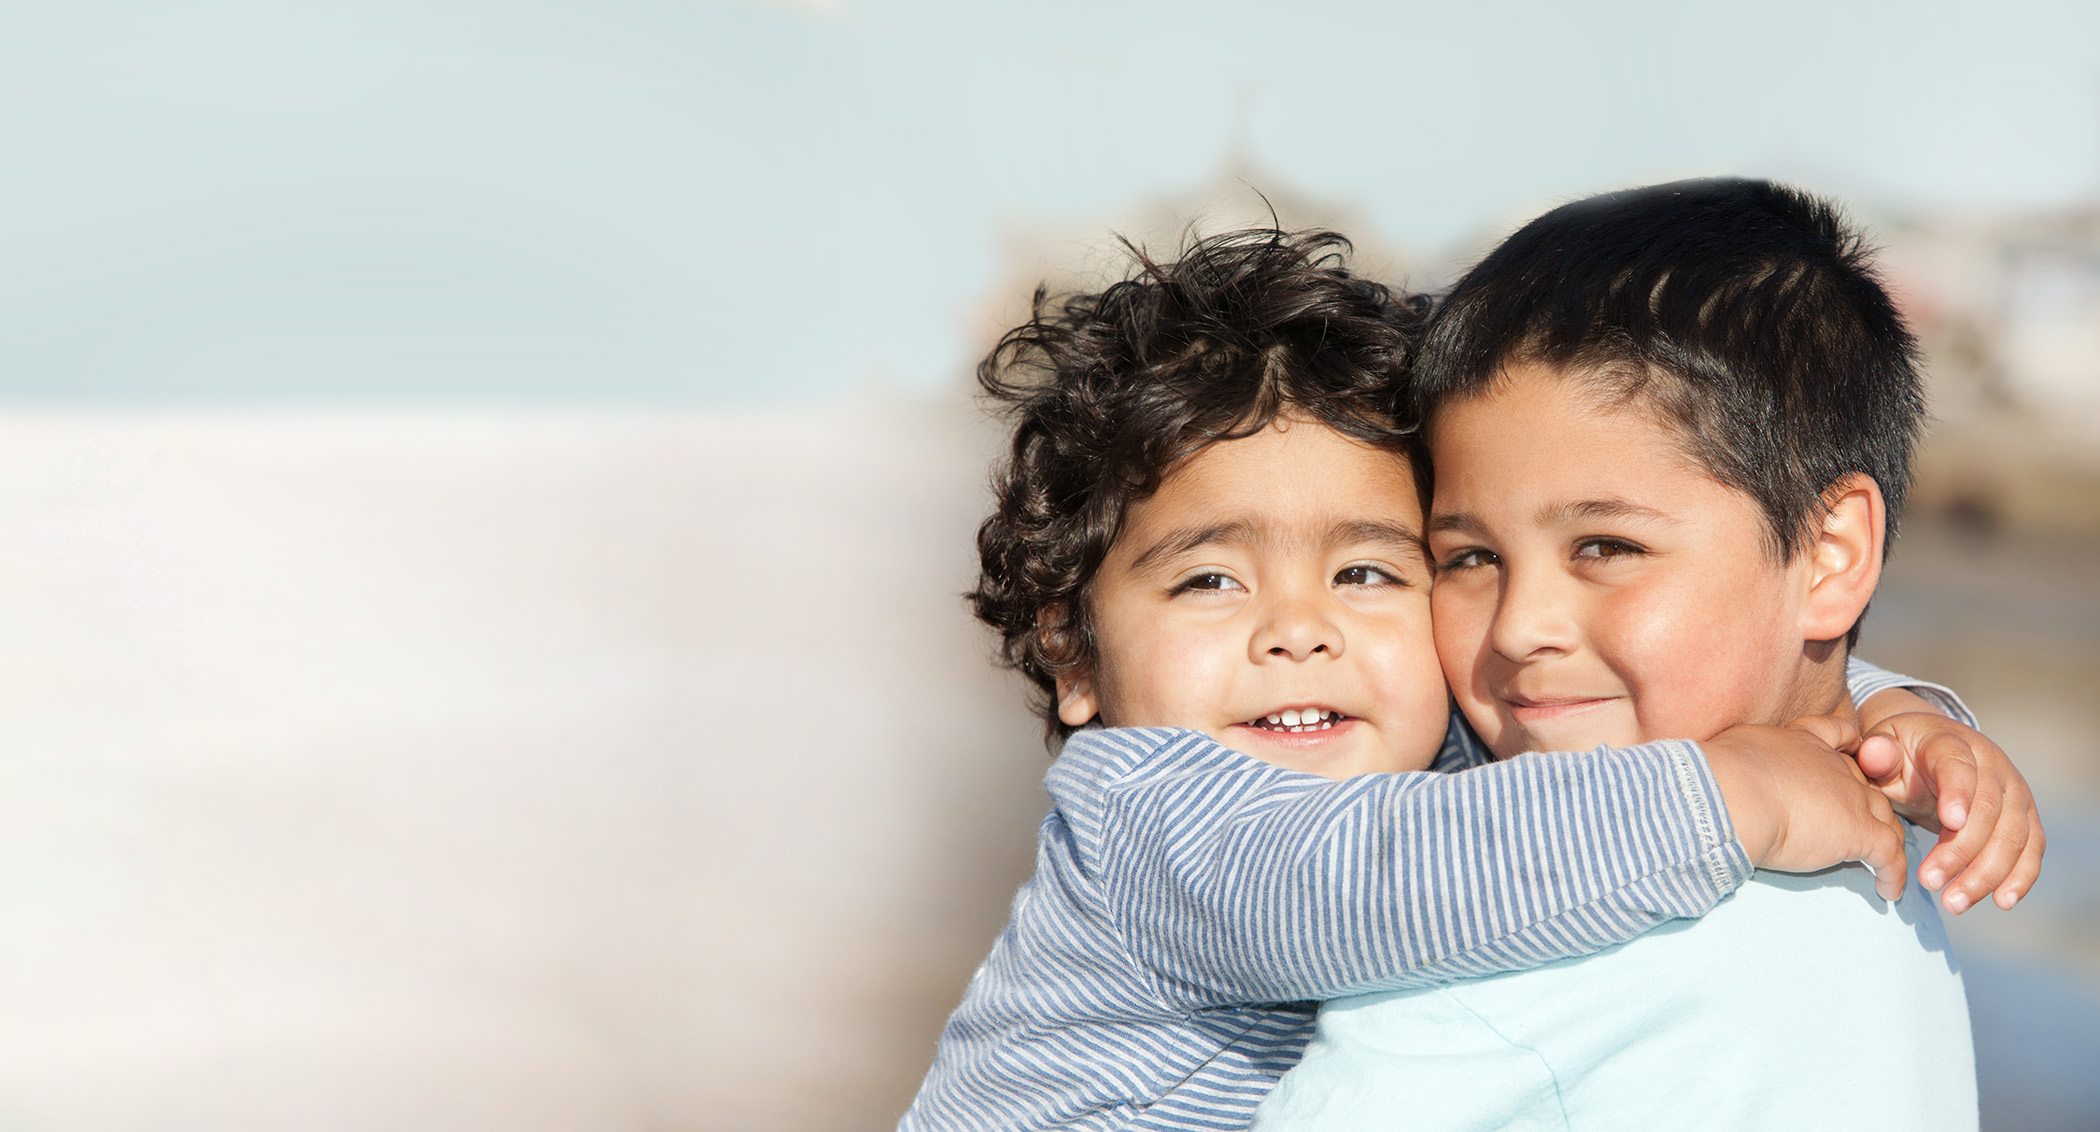 33 Reforms to Help Kids in Foster Care